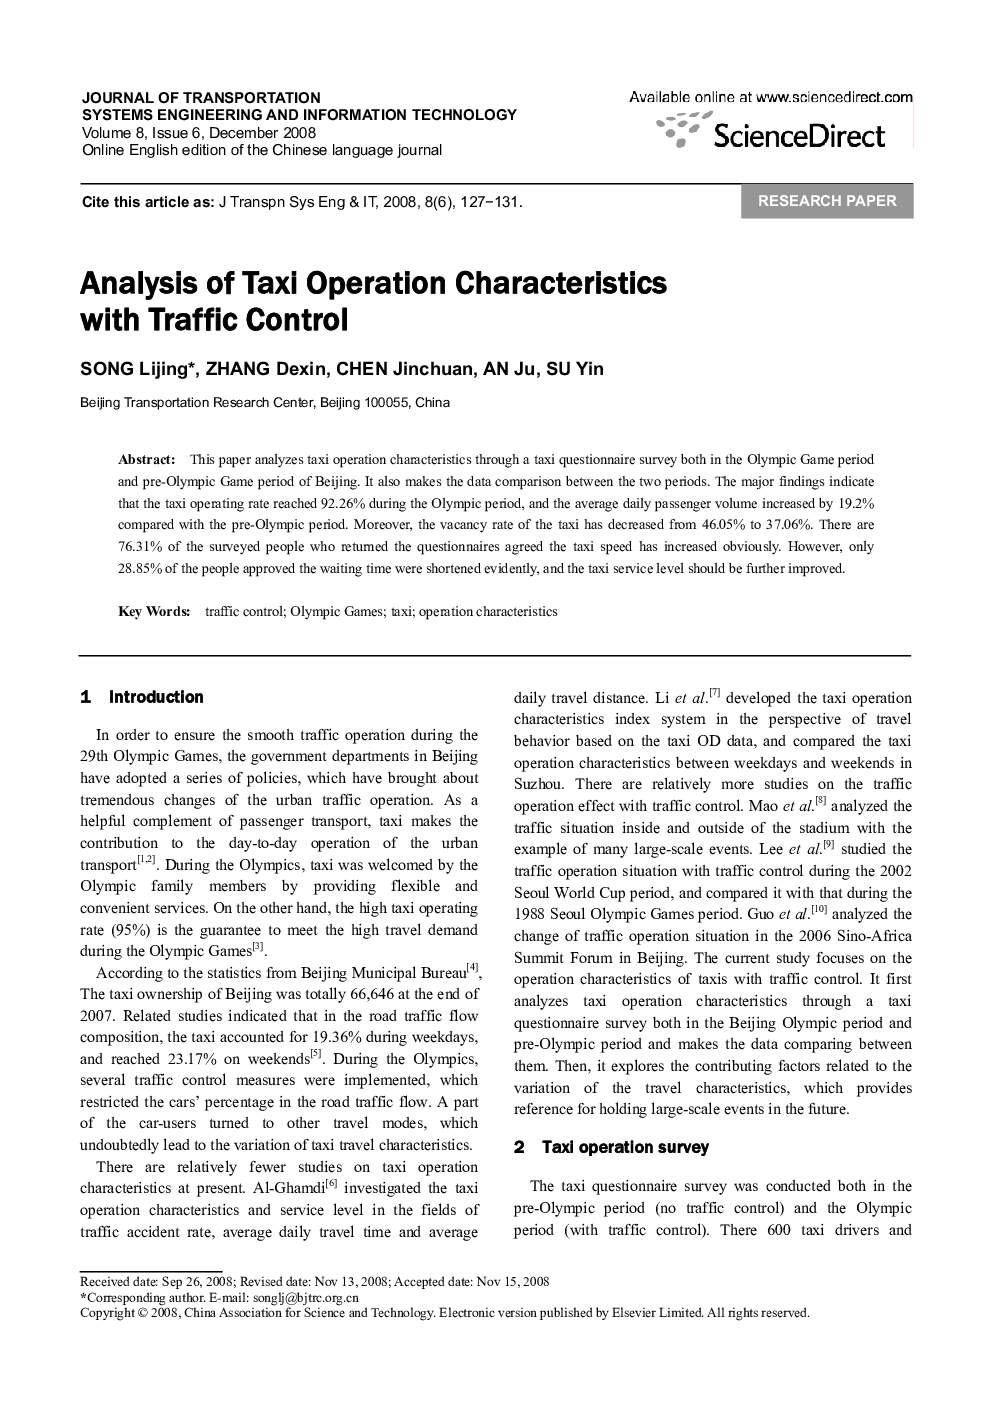 Analysis of Taxi Operation Characteristics with Traffic Control